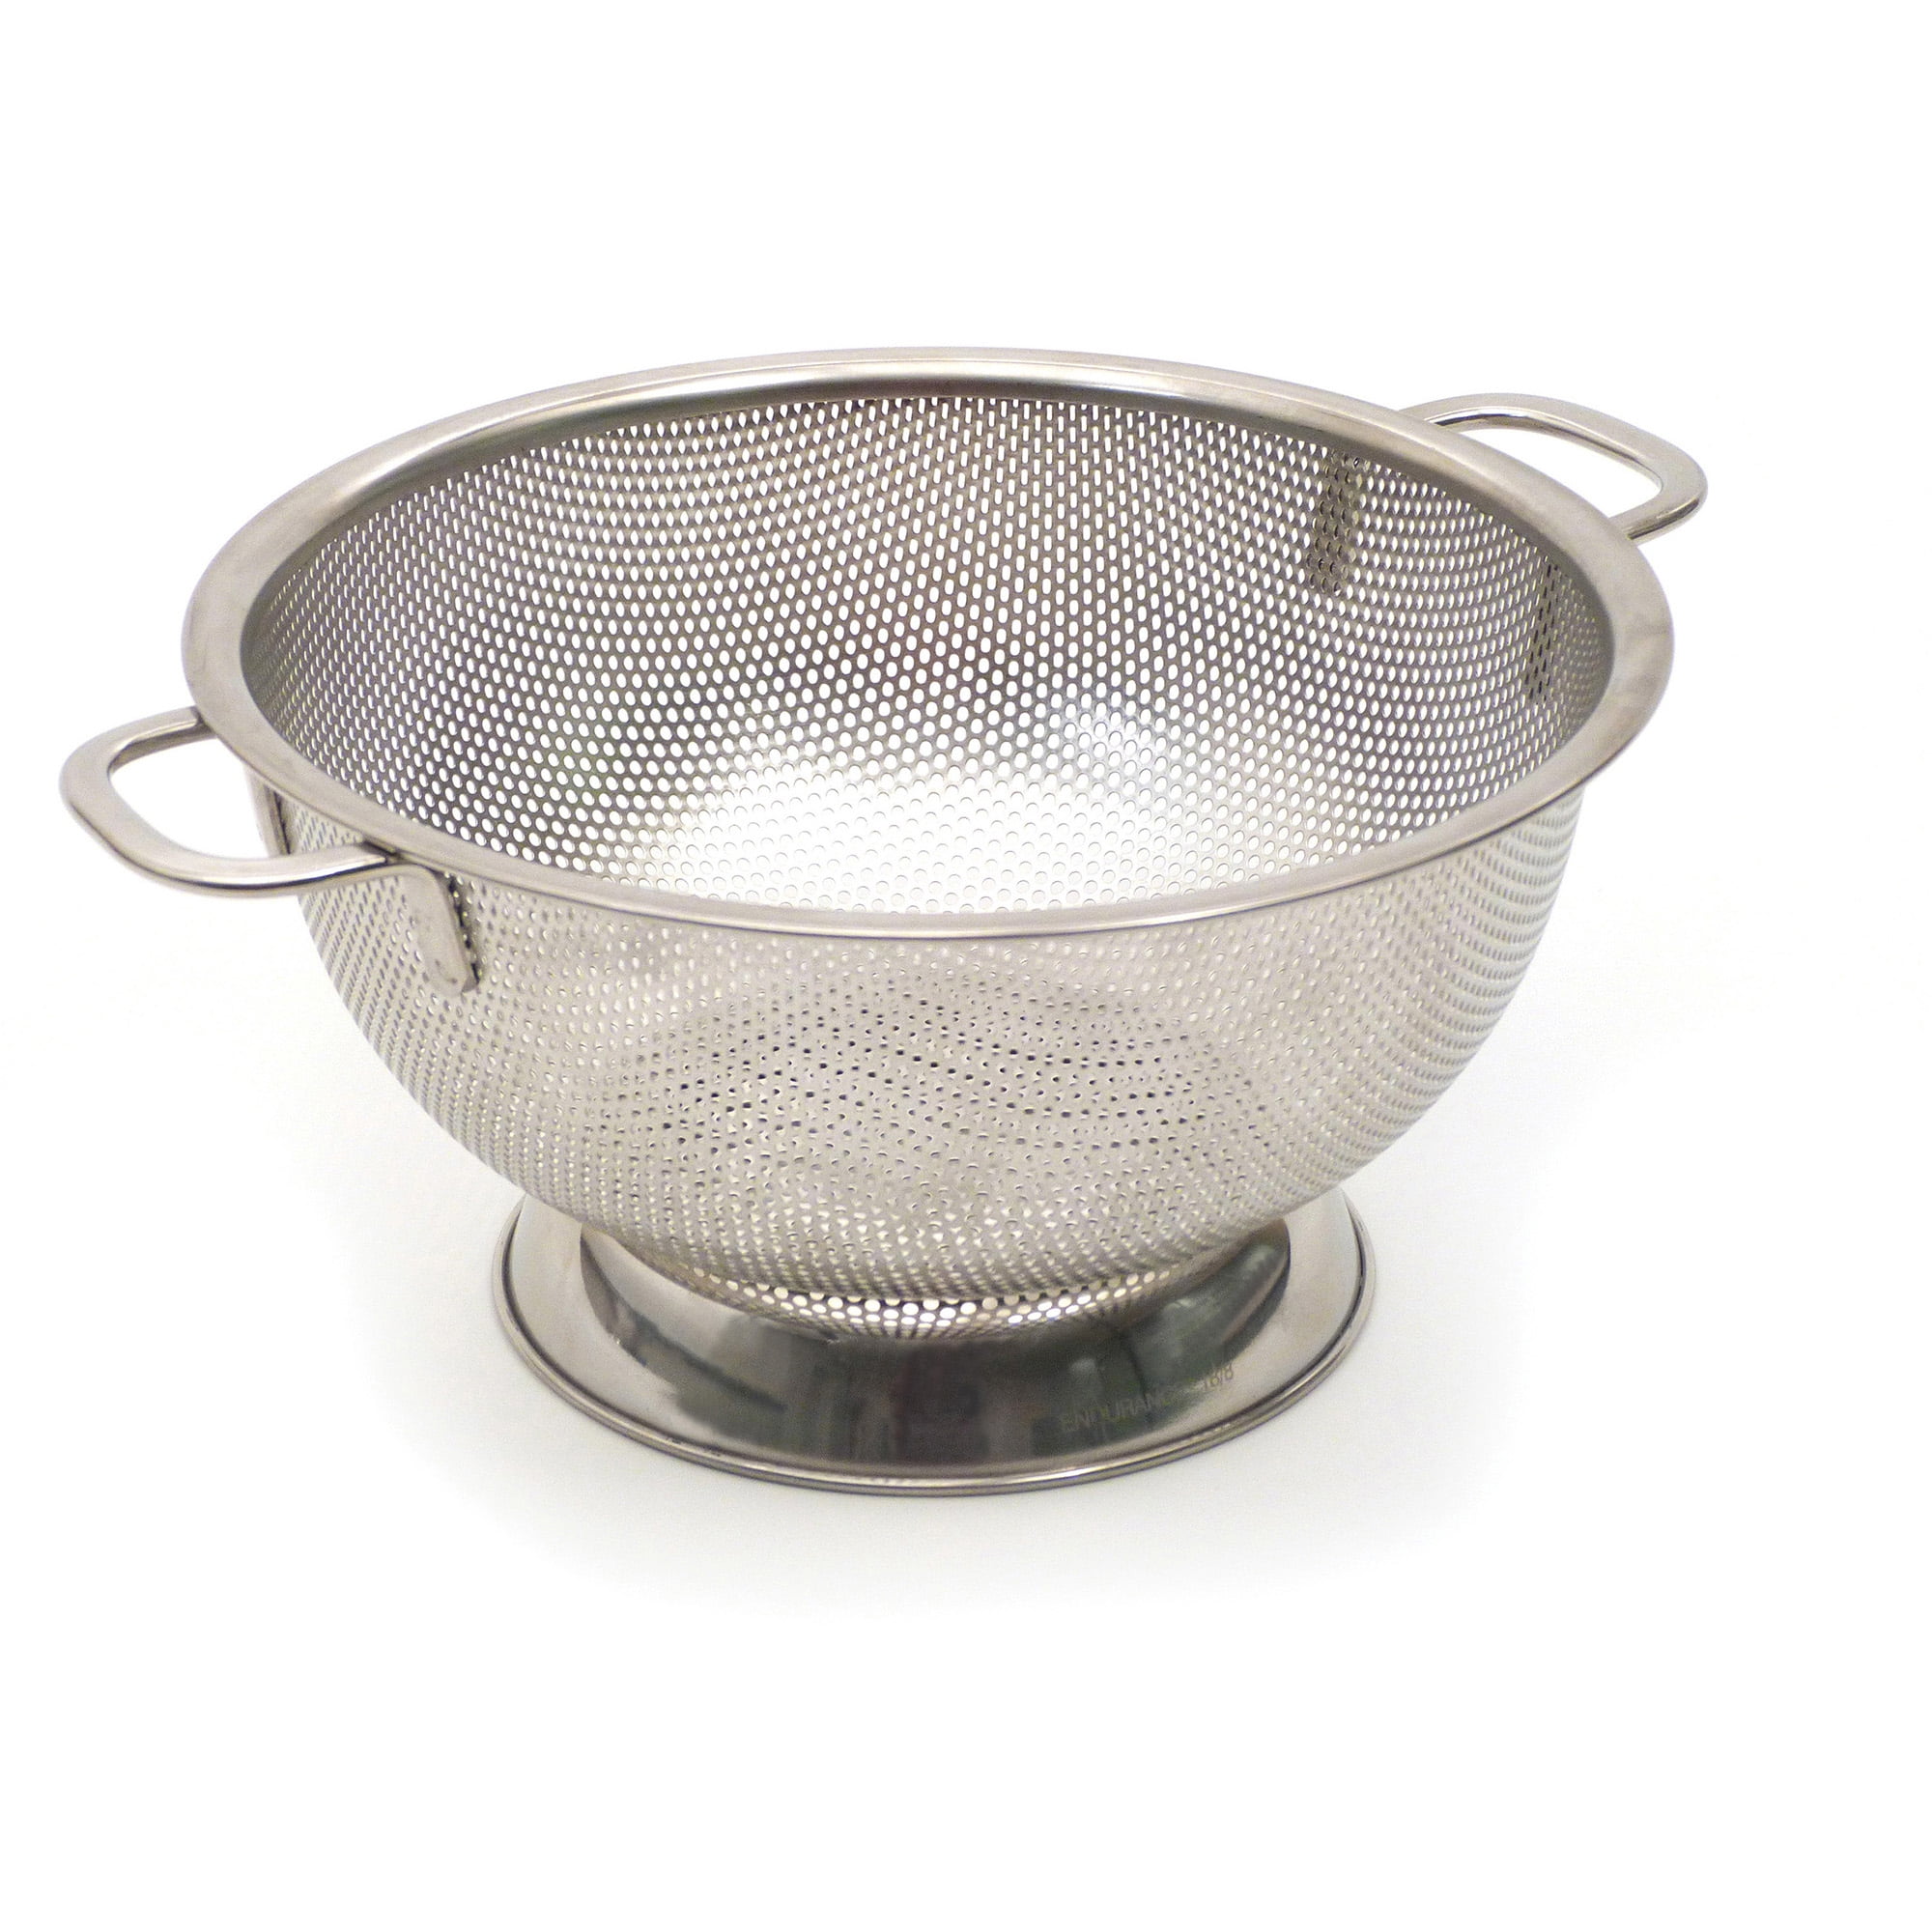  Rosle Stainless Steel Collapsible Colander, 10-inch, Black: Rosle  Strainer: Home & Kitchen